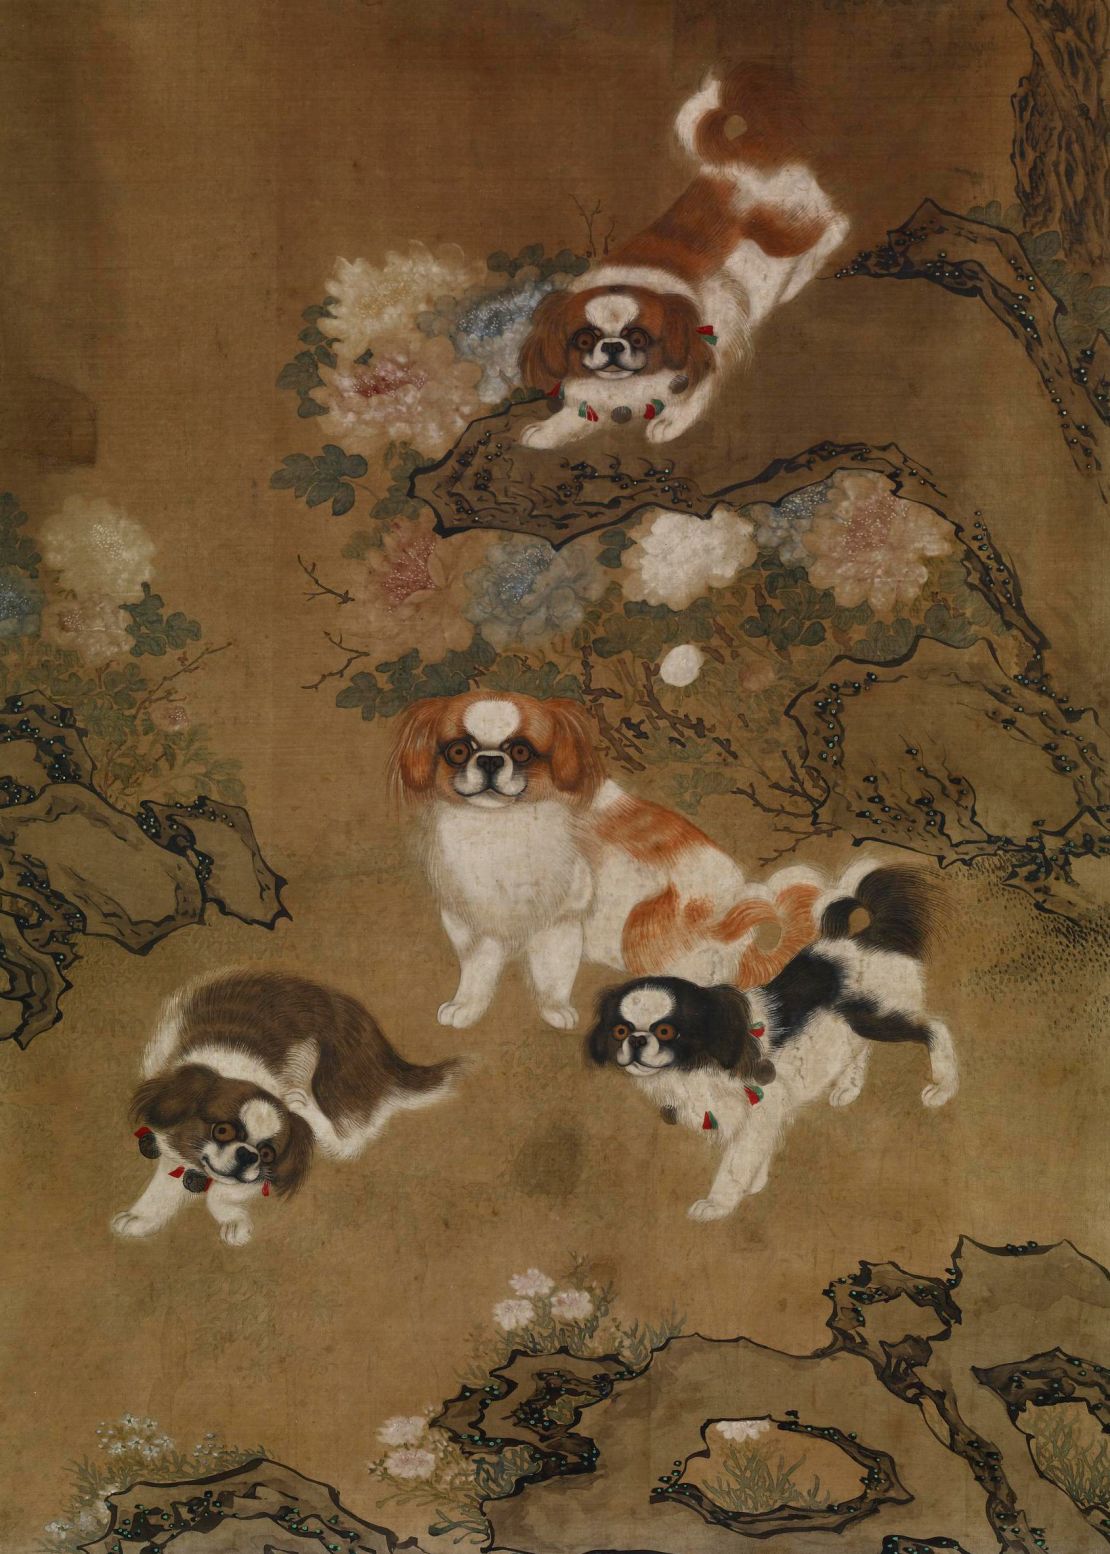 Pekingese dogs depicted in a 19th-century Chinese hanging scroll.